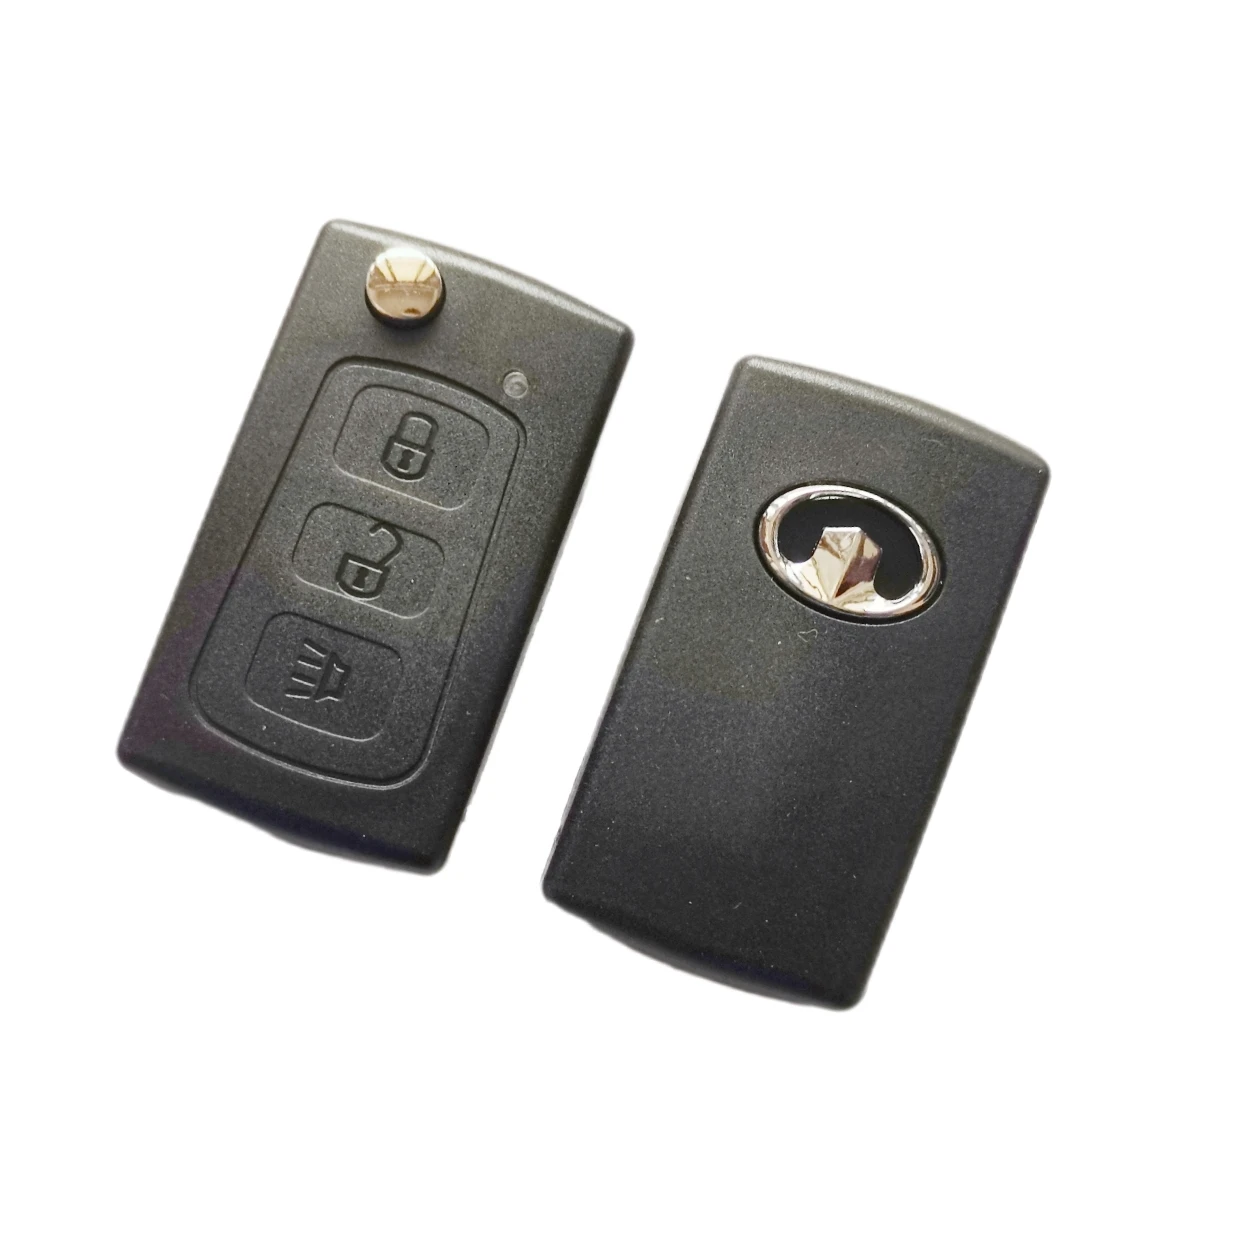 3 Buttons Replacement Flip Folding Remote Key Case Shell For Great Wall Hover Haval H3 H5 Keyless Entry Fob Key Cover